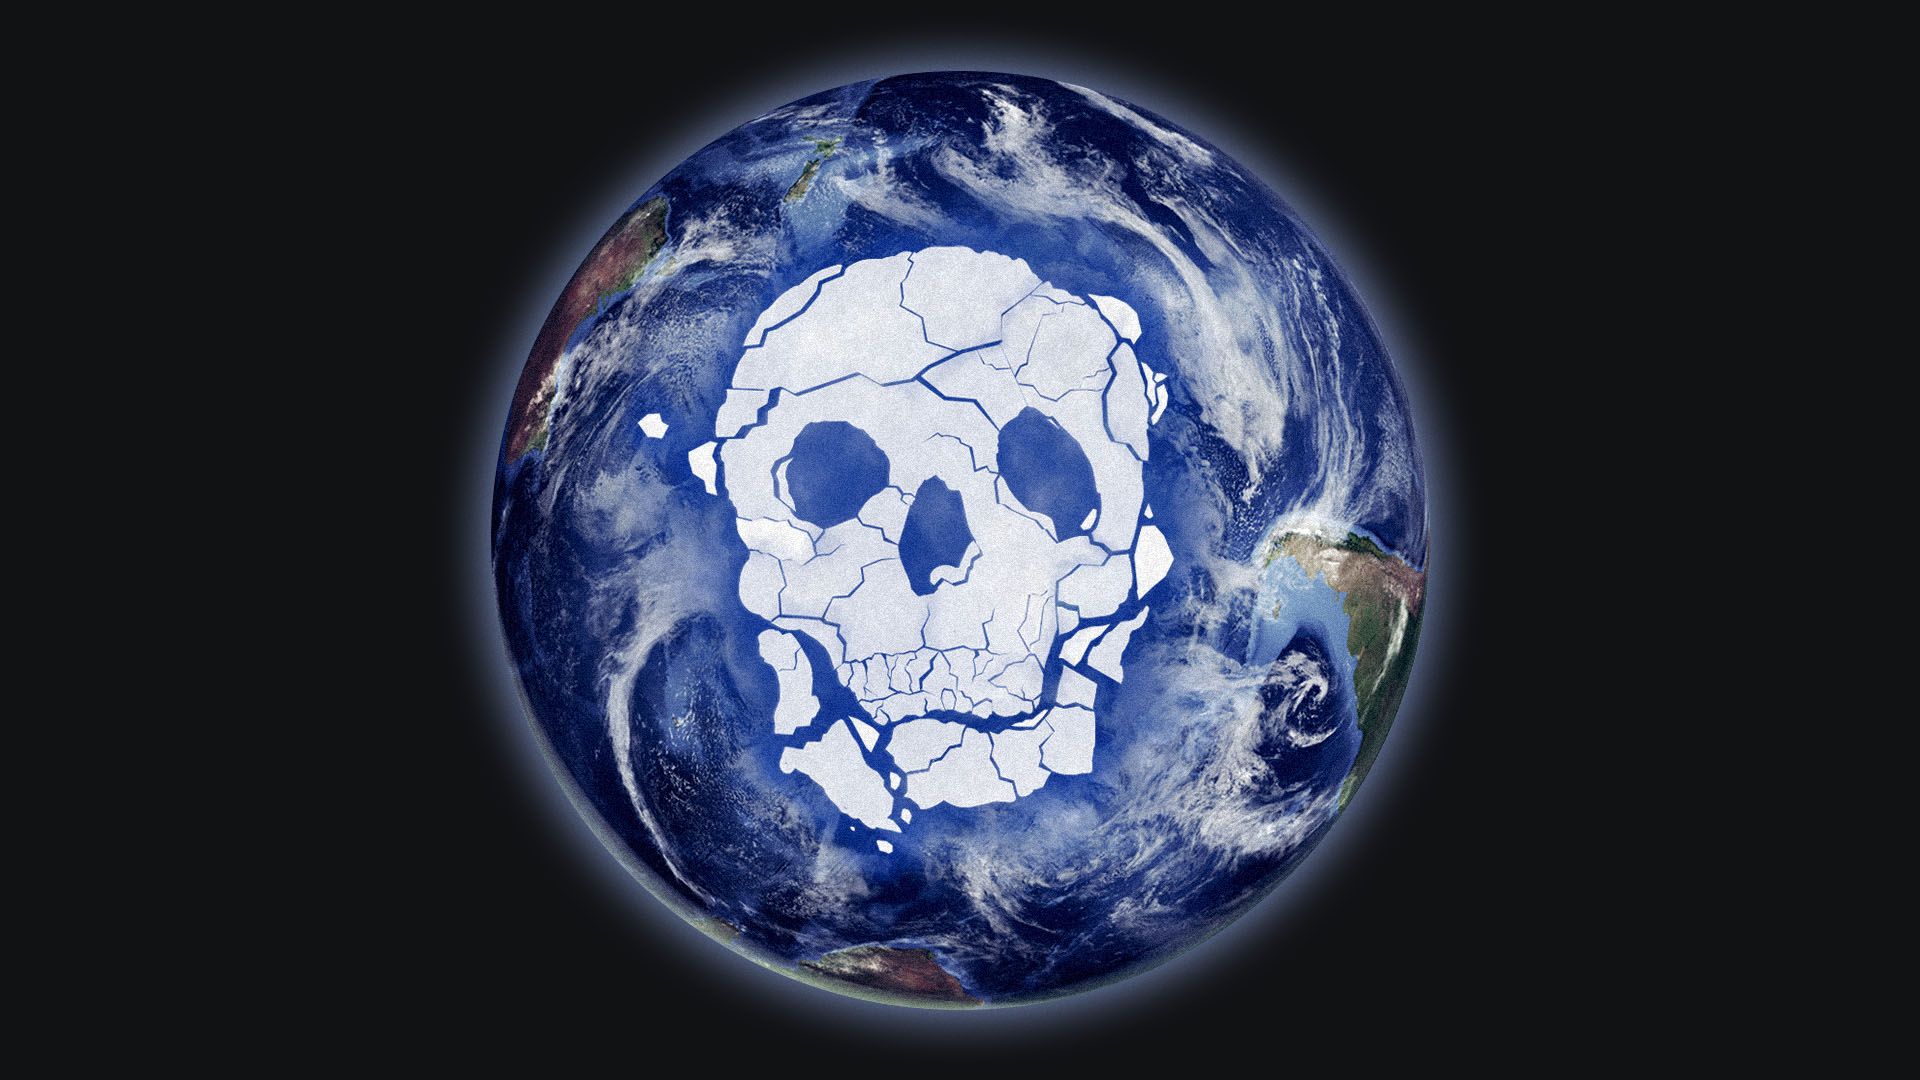  Illustration of the Antarctic ice melted into the shape of a skull.